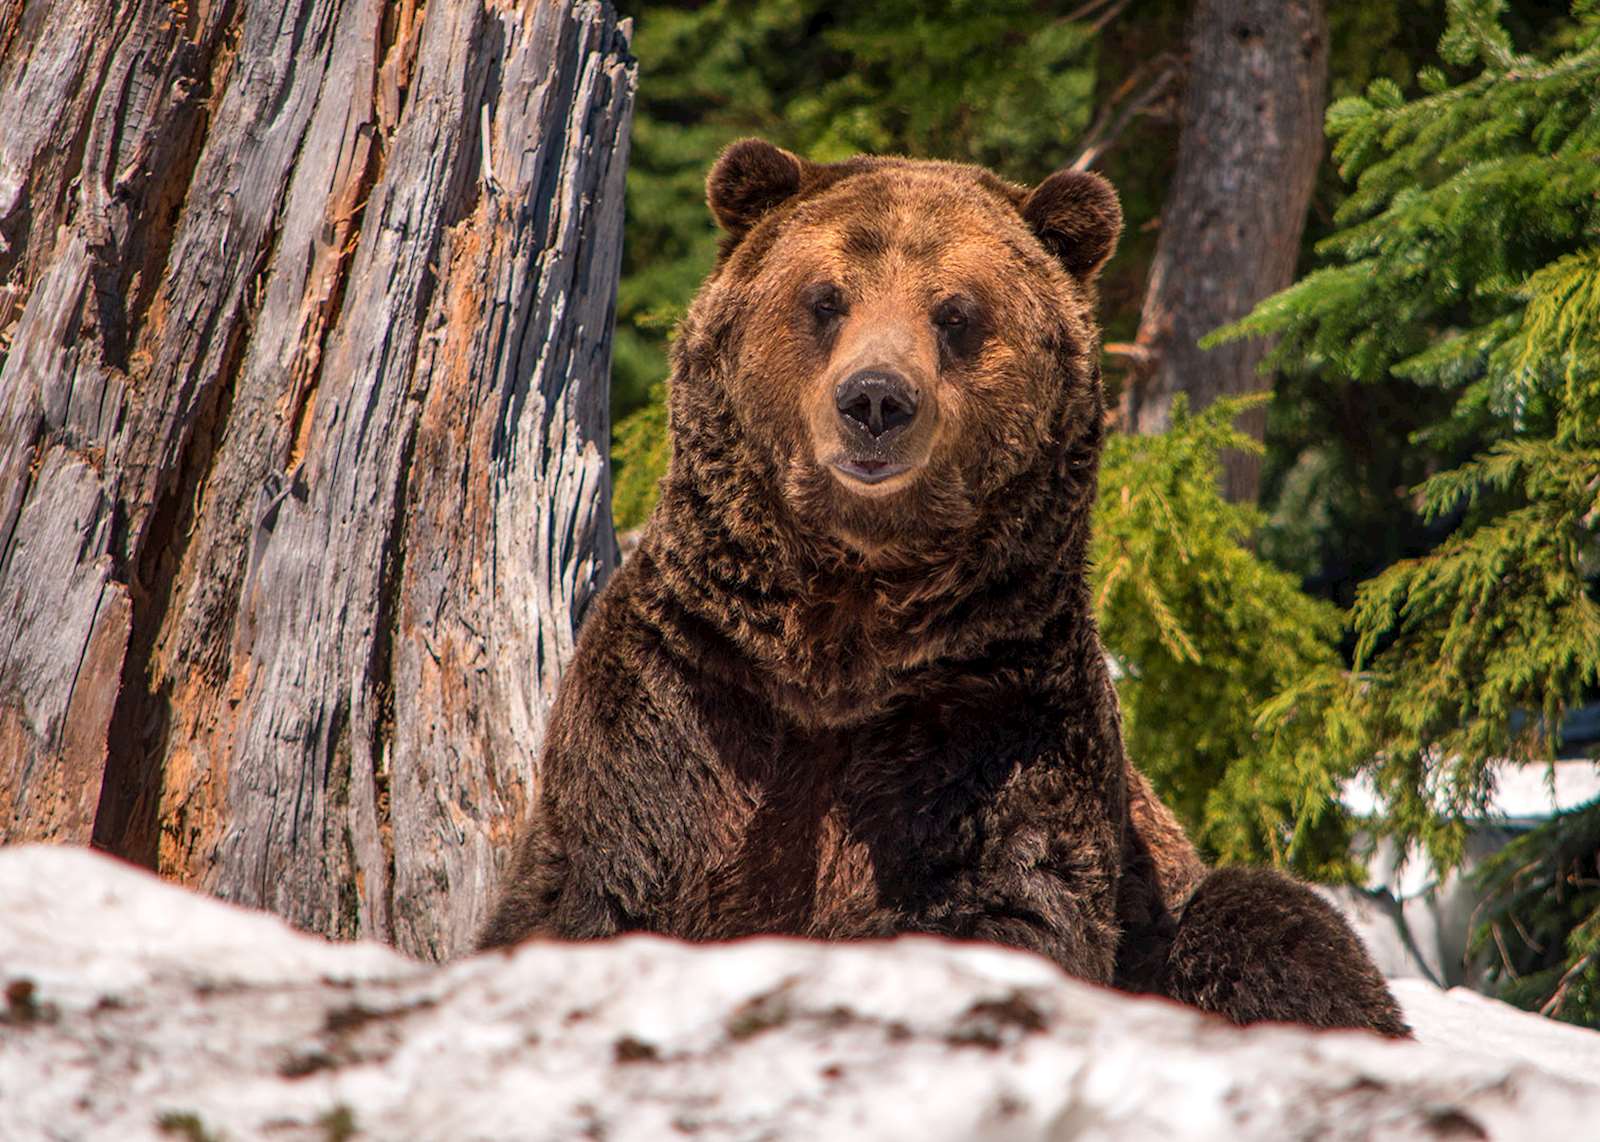 grizzly bear watching tours canada